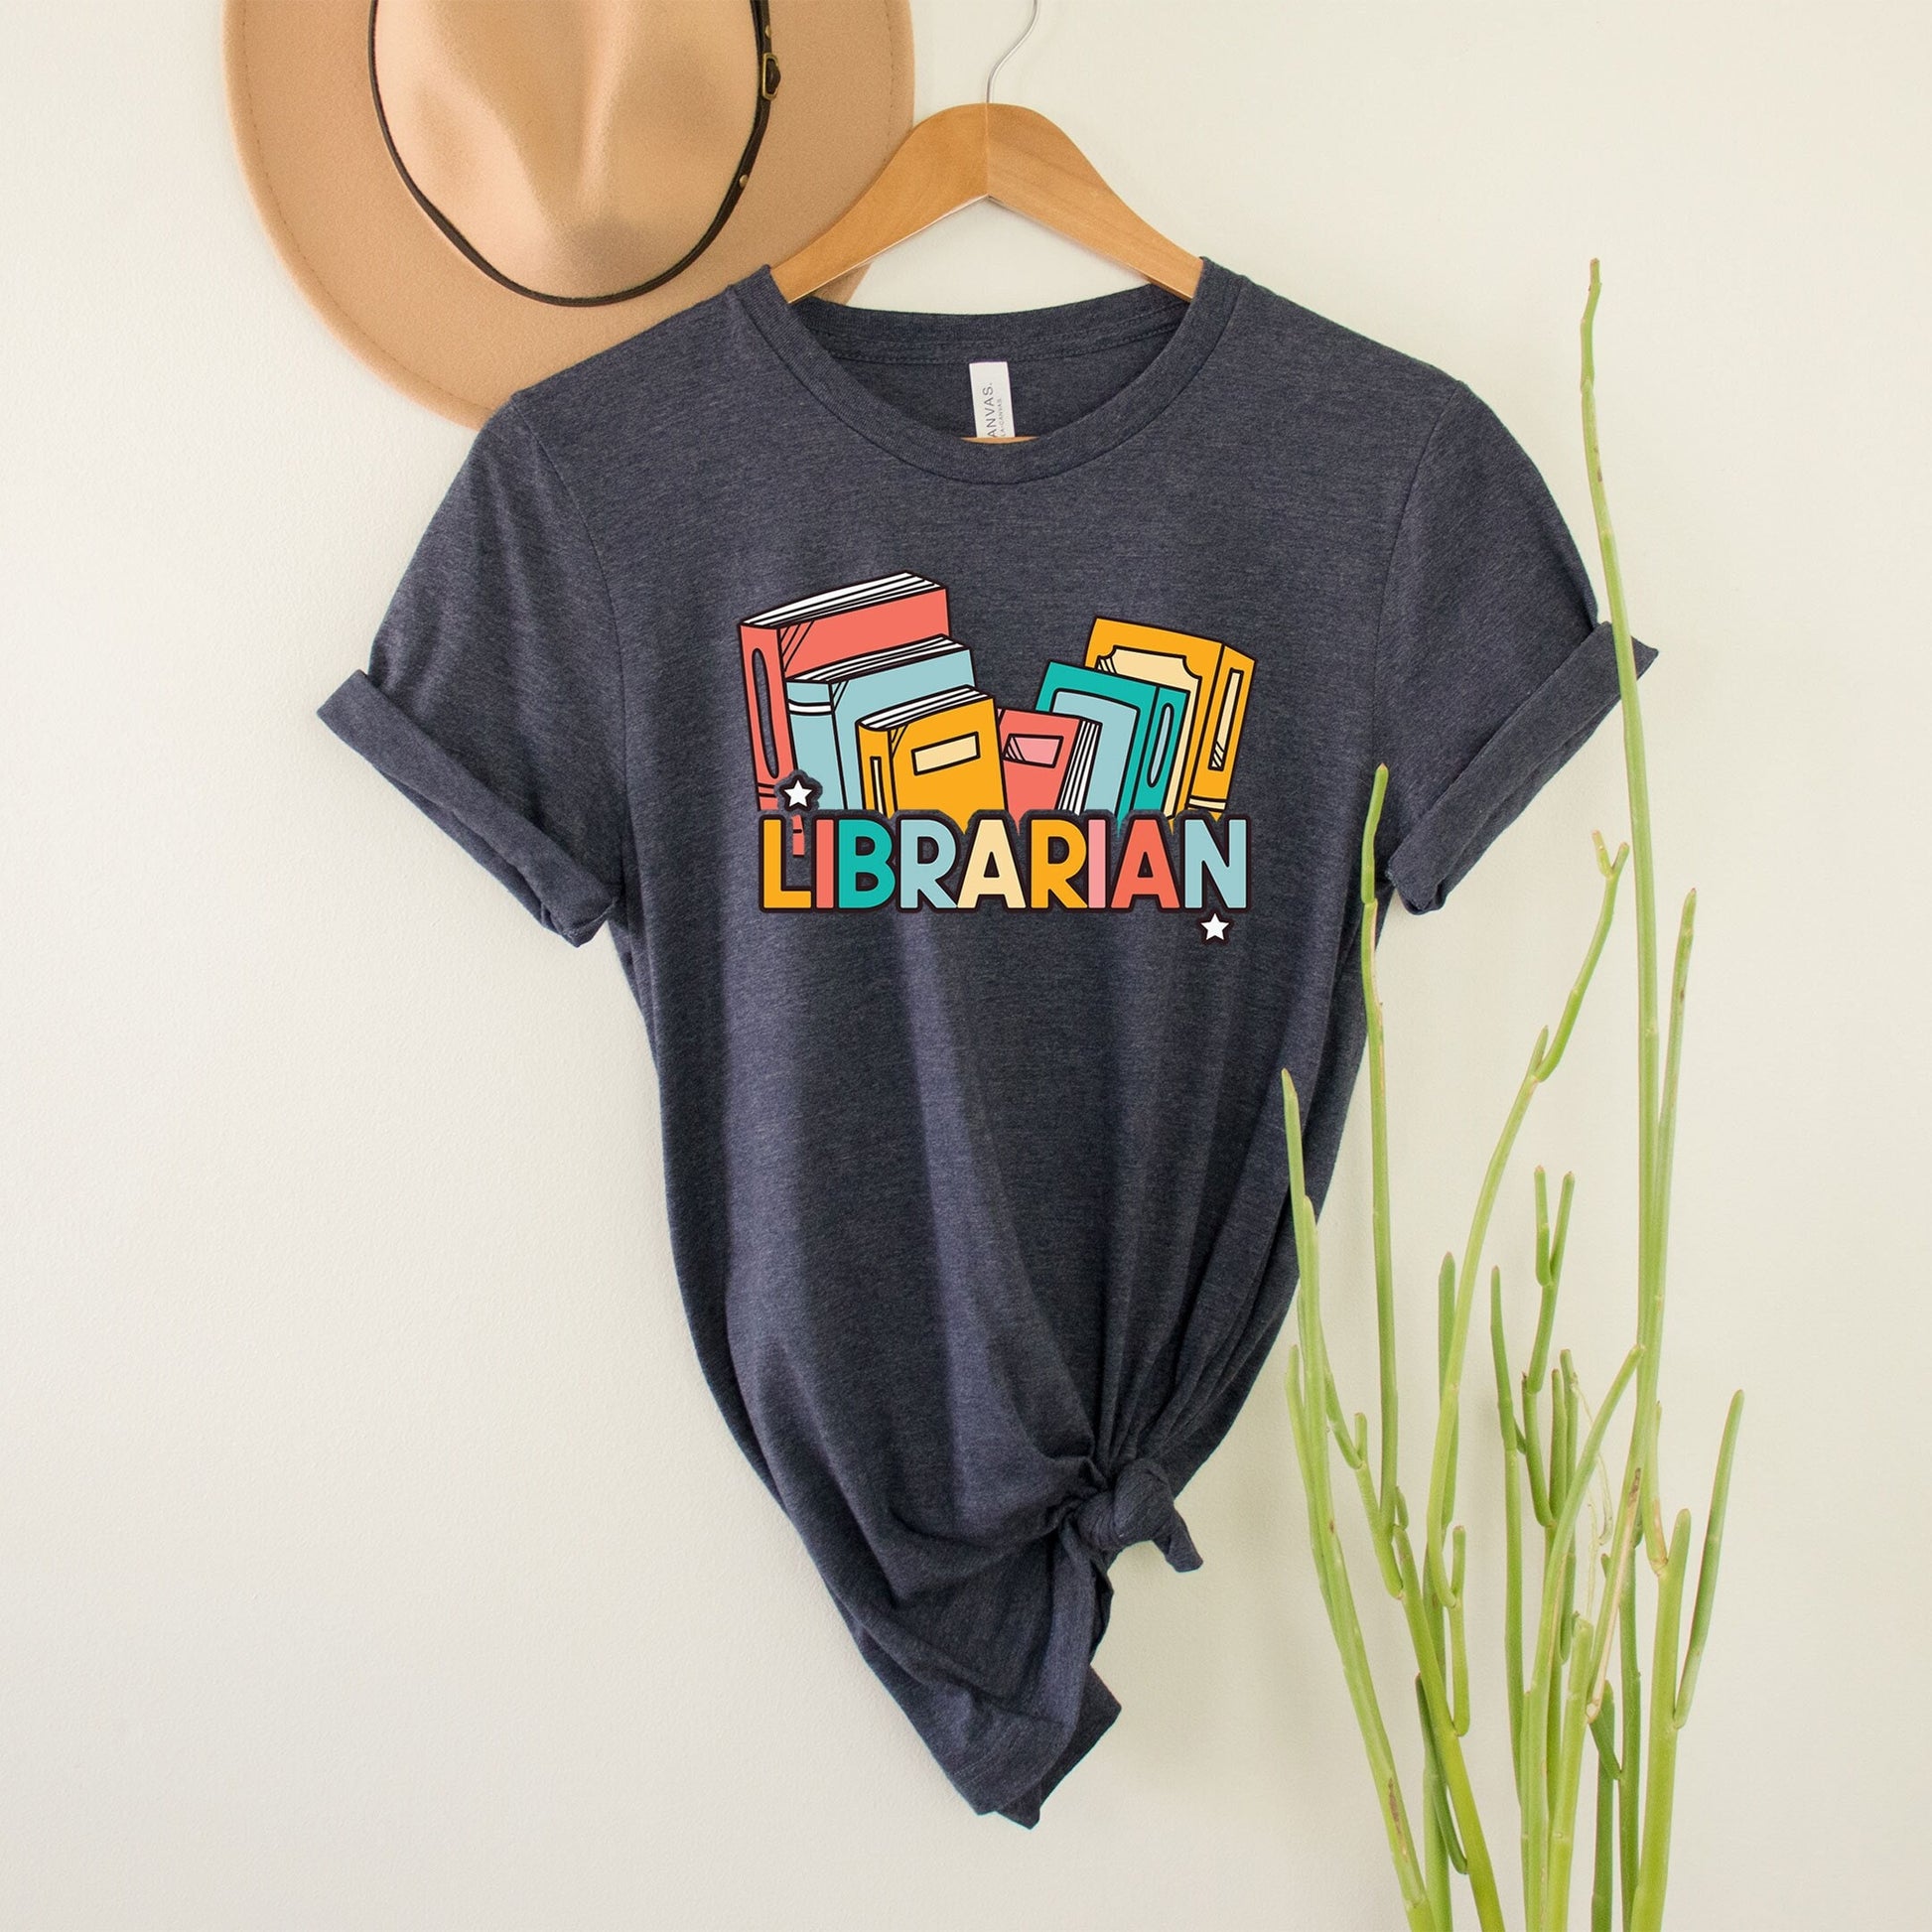 Librarian Shirt, Book Lover T-shirt, Colorful Books Tee, Gift For Librarian, Library Book Reader Shirt, Reading Book Lover Nerdy Nerd Smart